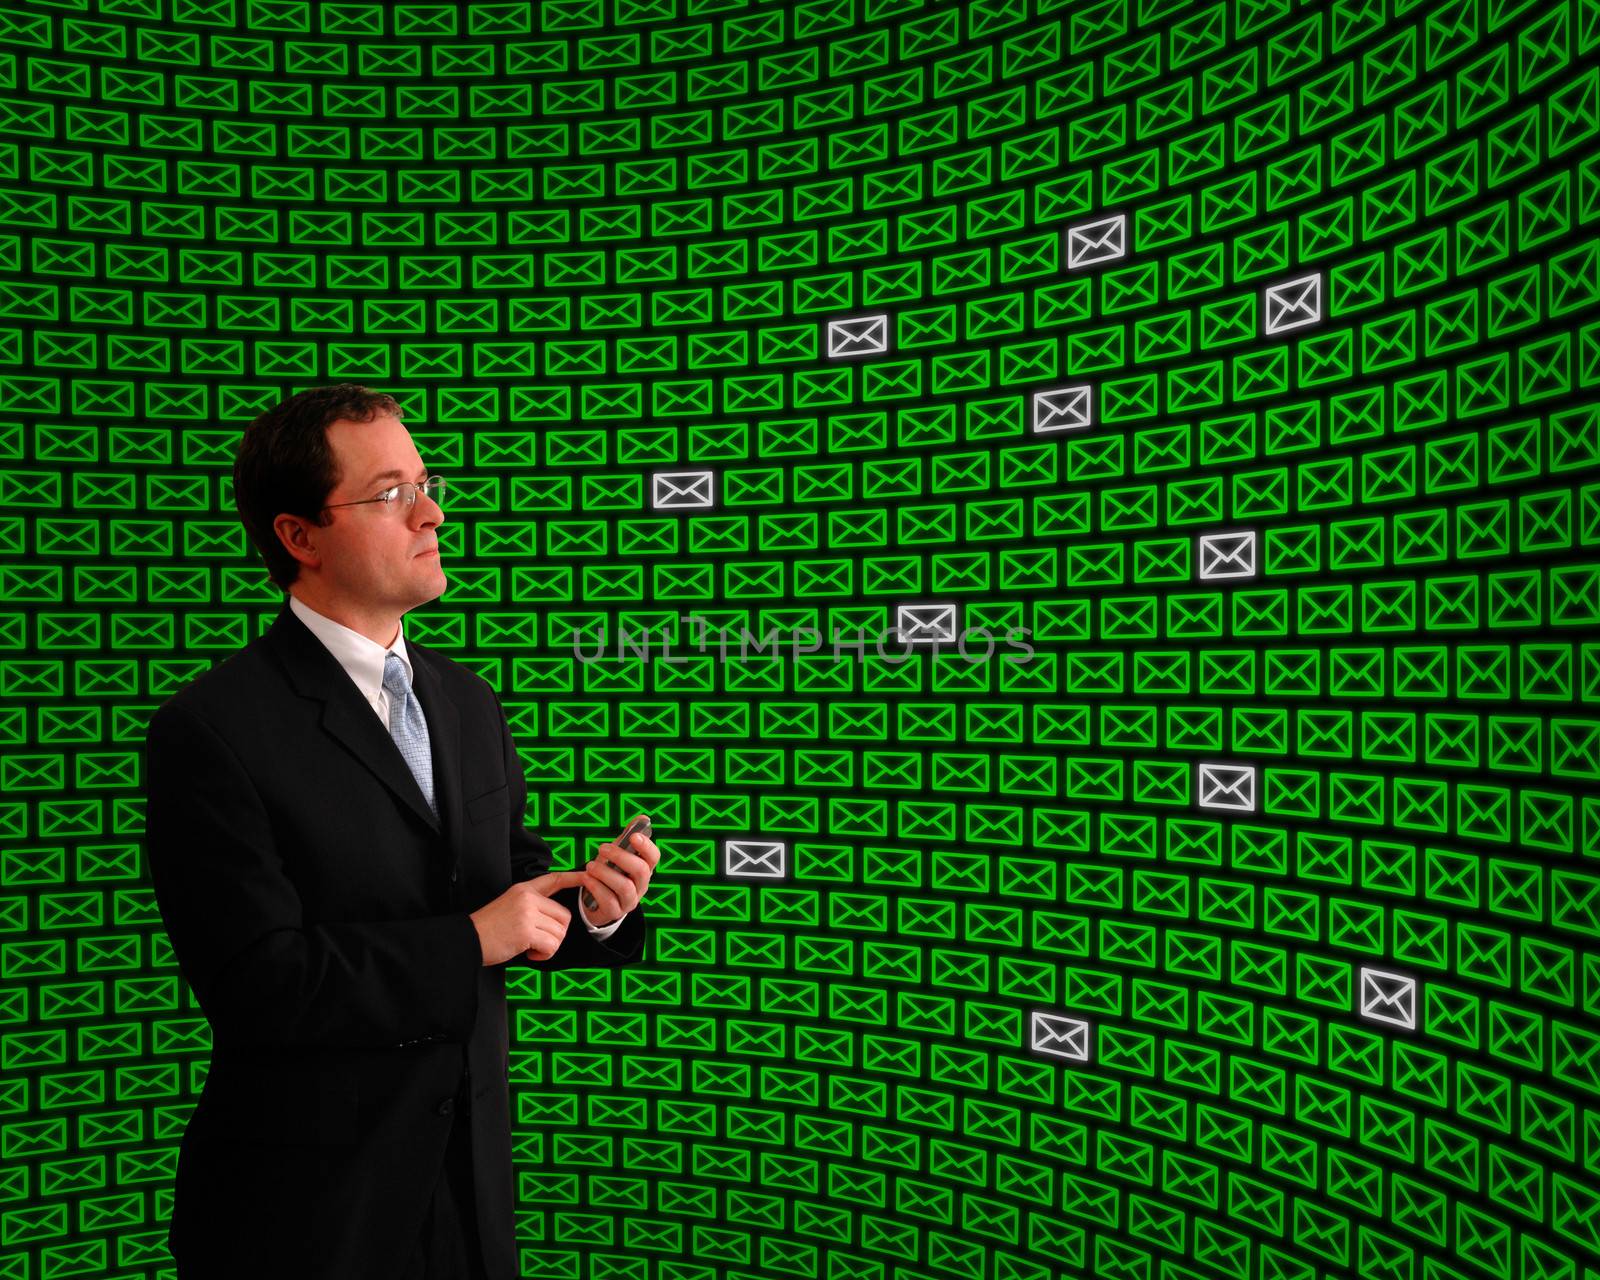 Man monitoring an array of emails among a field of green message icons